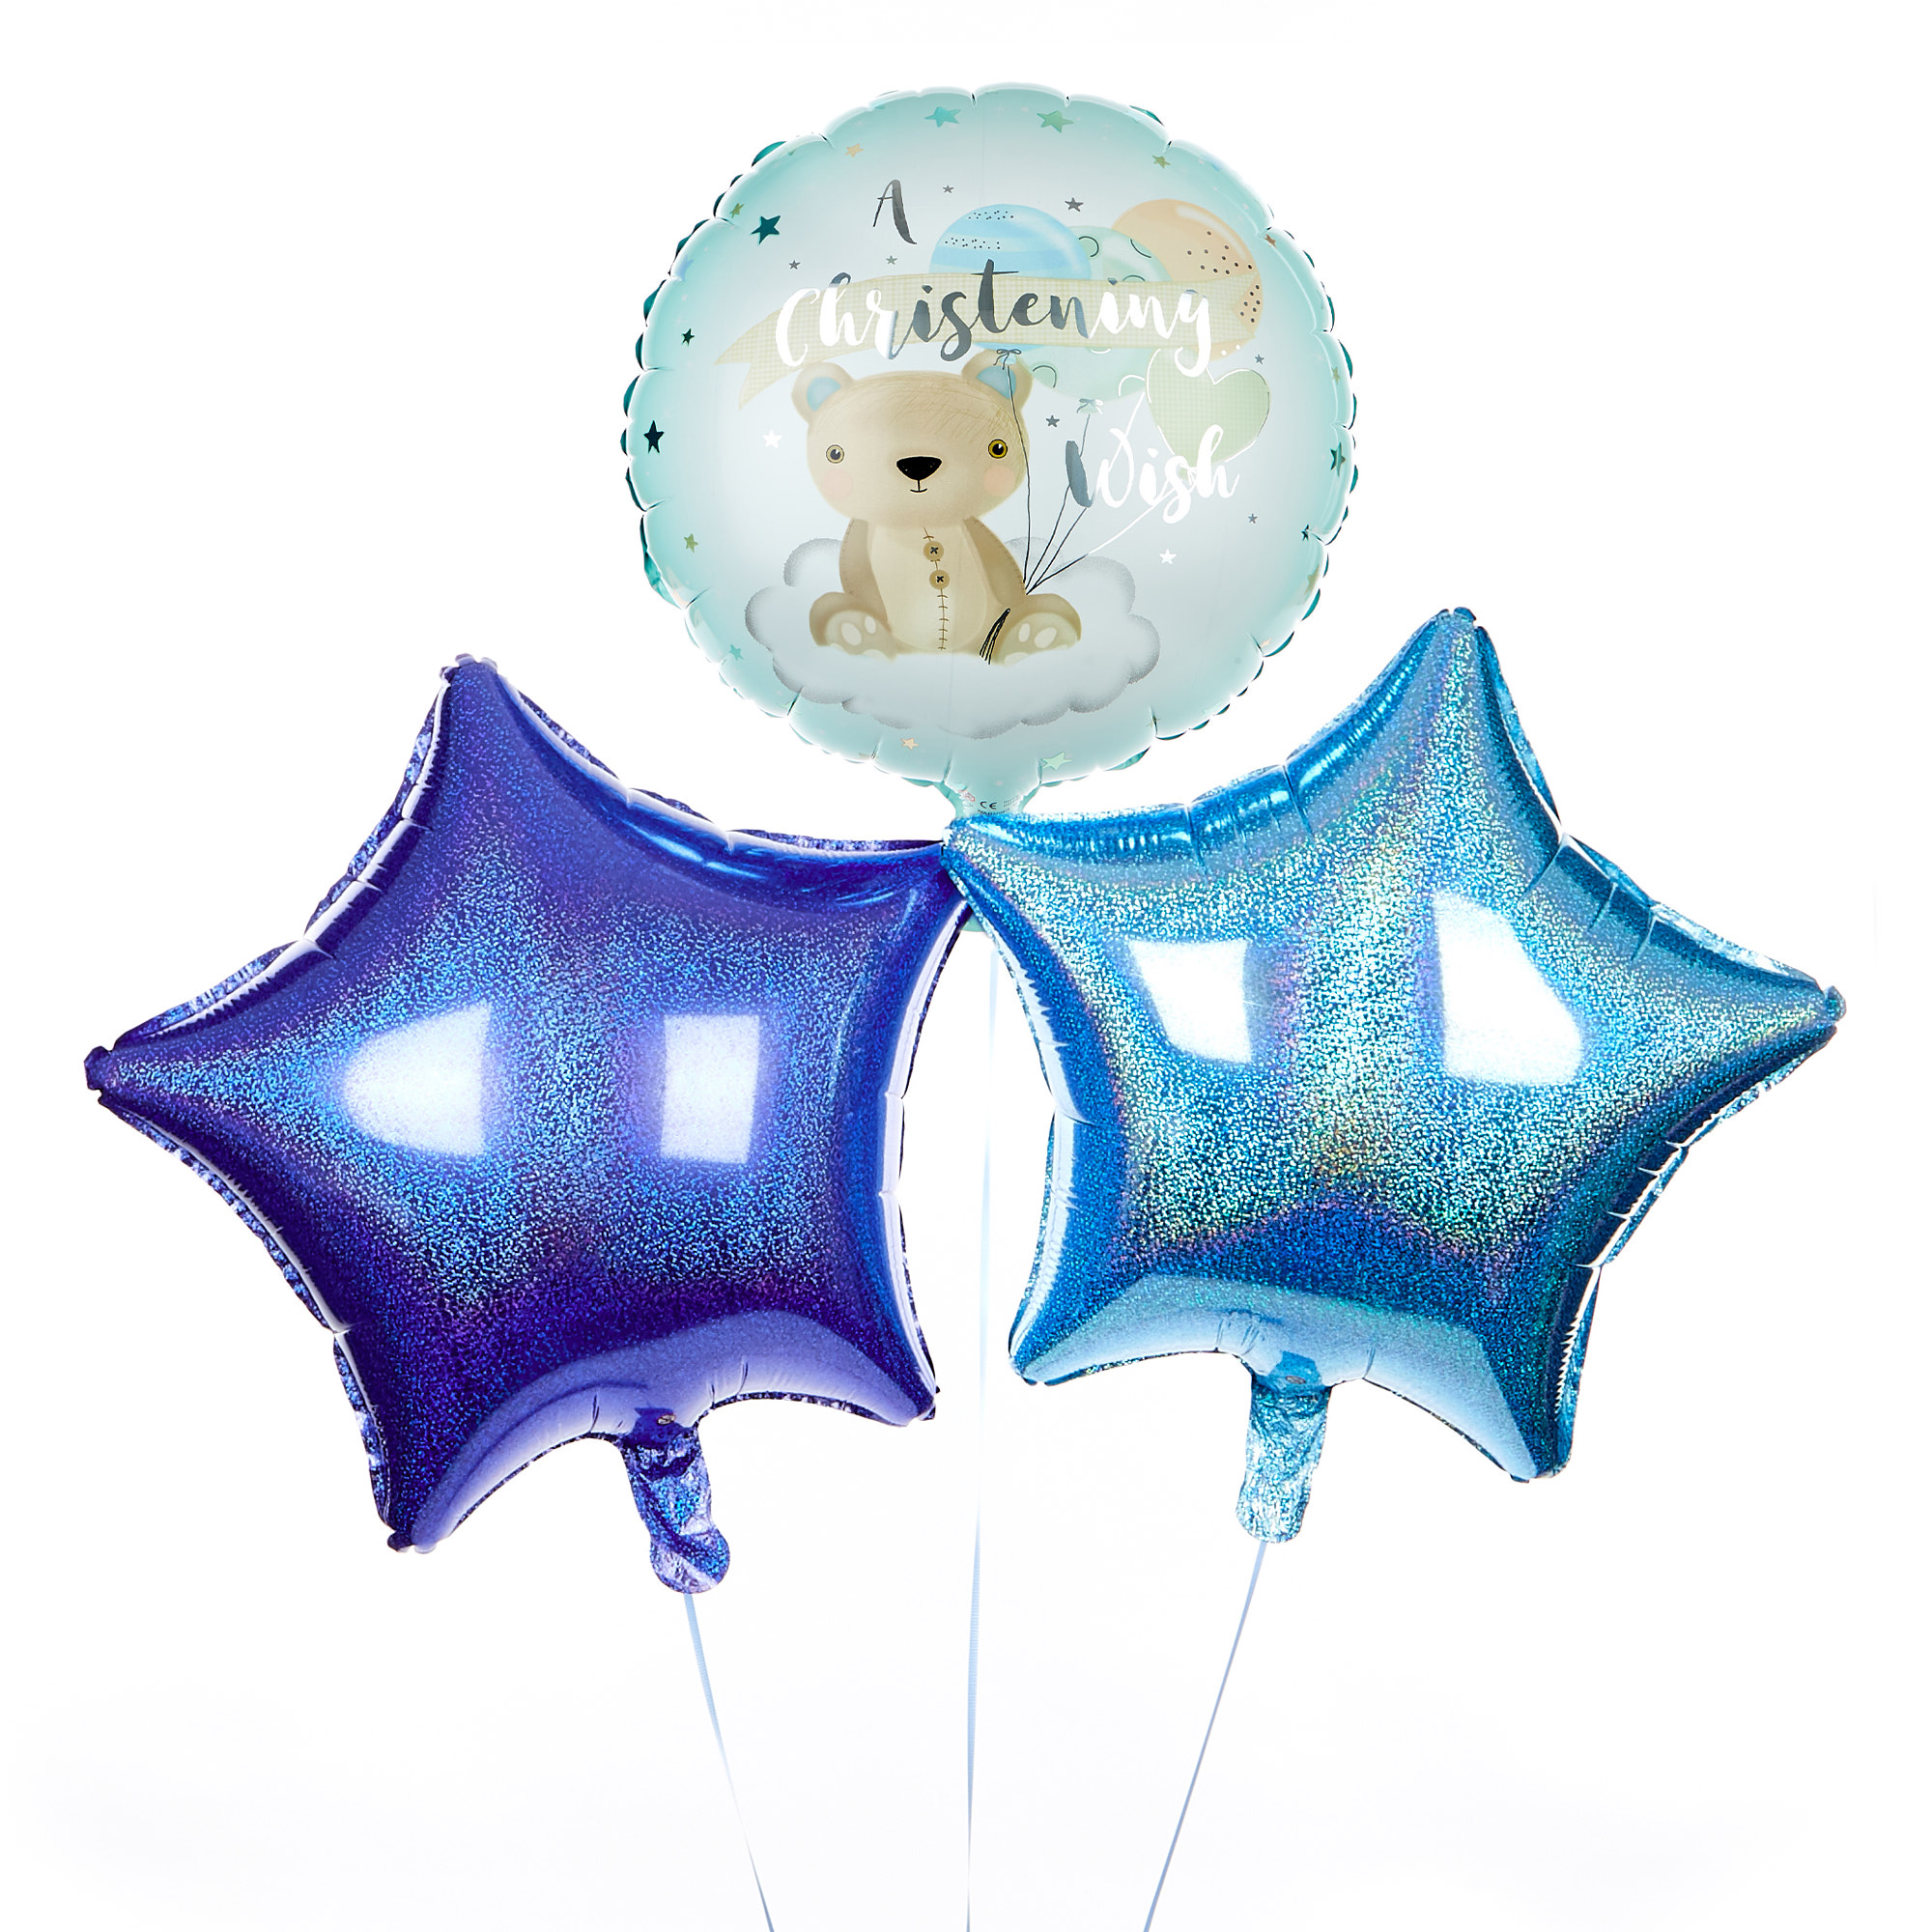 Blue Christening Wish Balloon Bouquet - DELIVERED INFLATED!